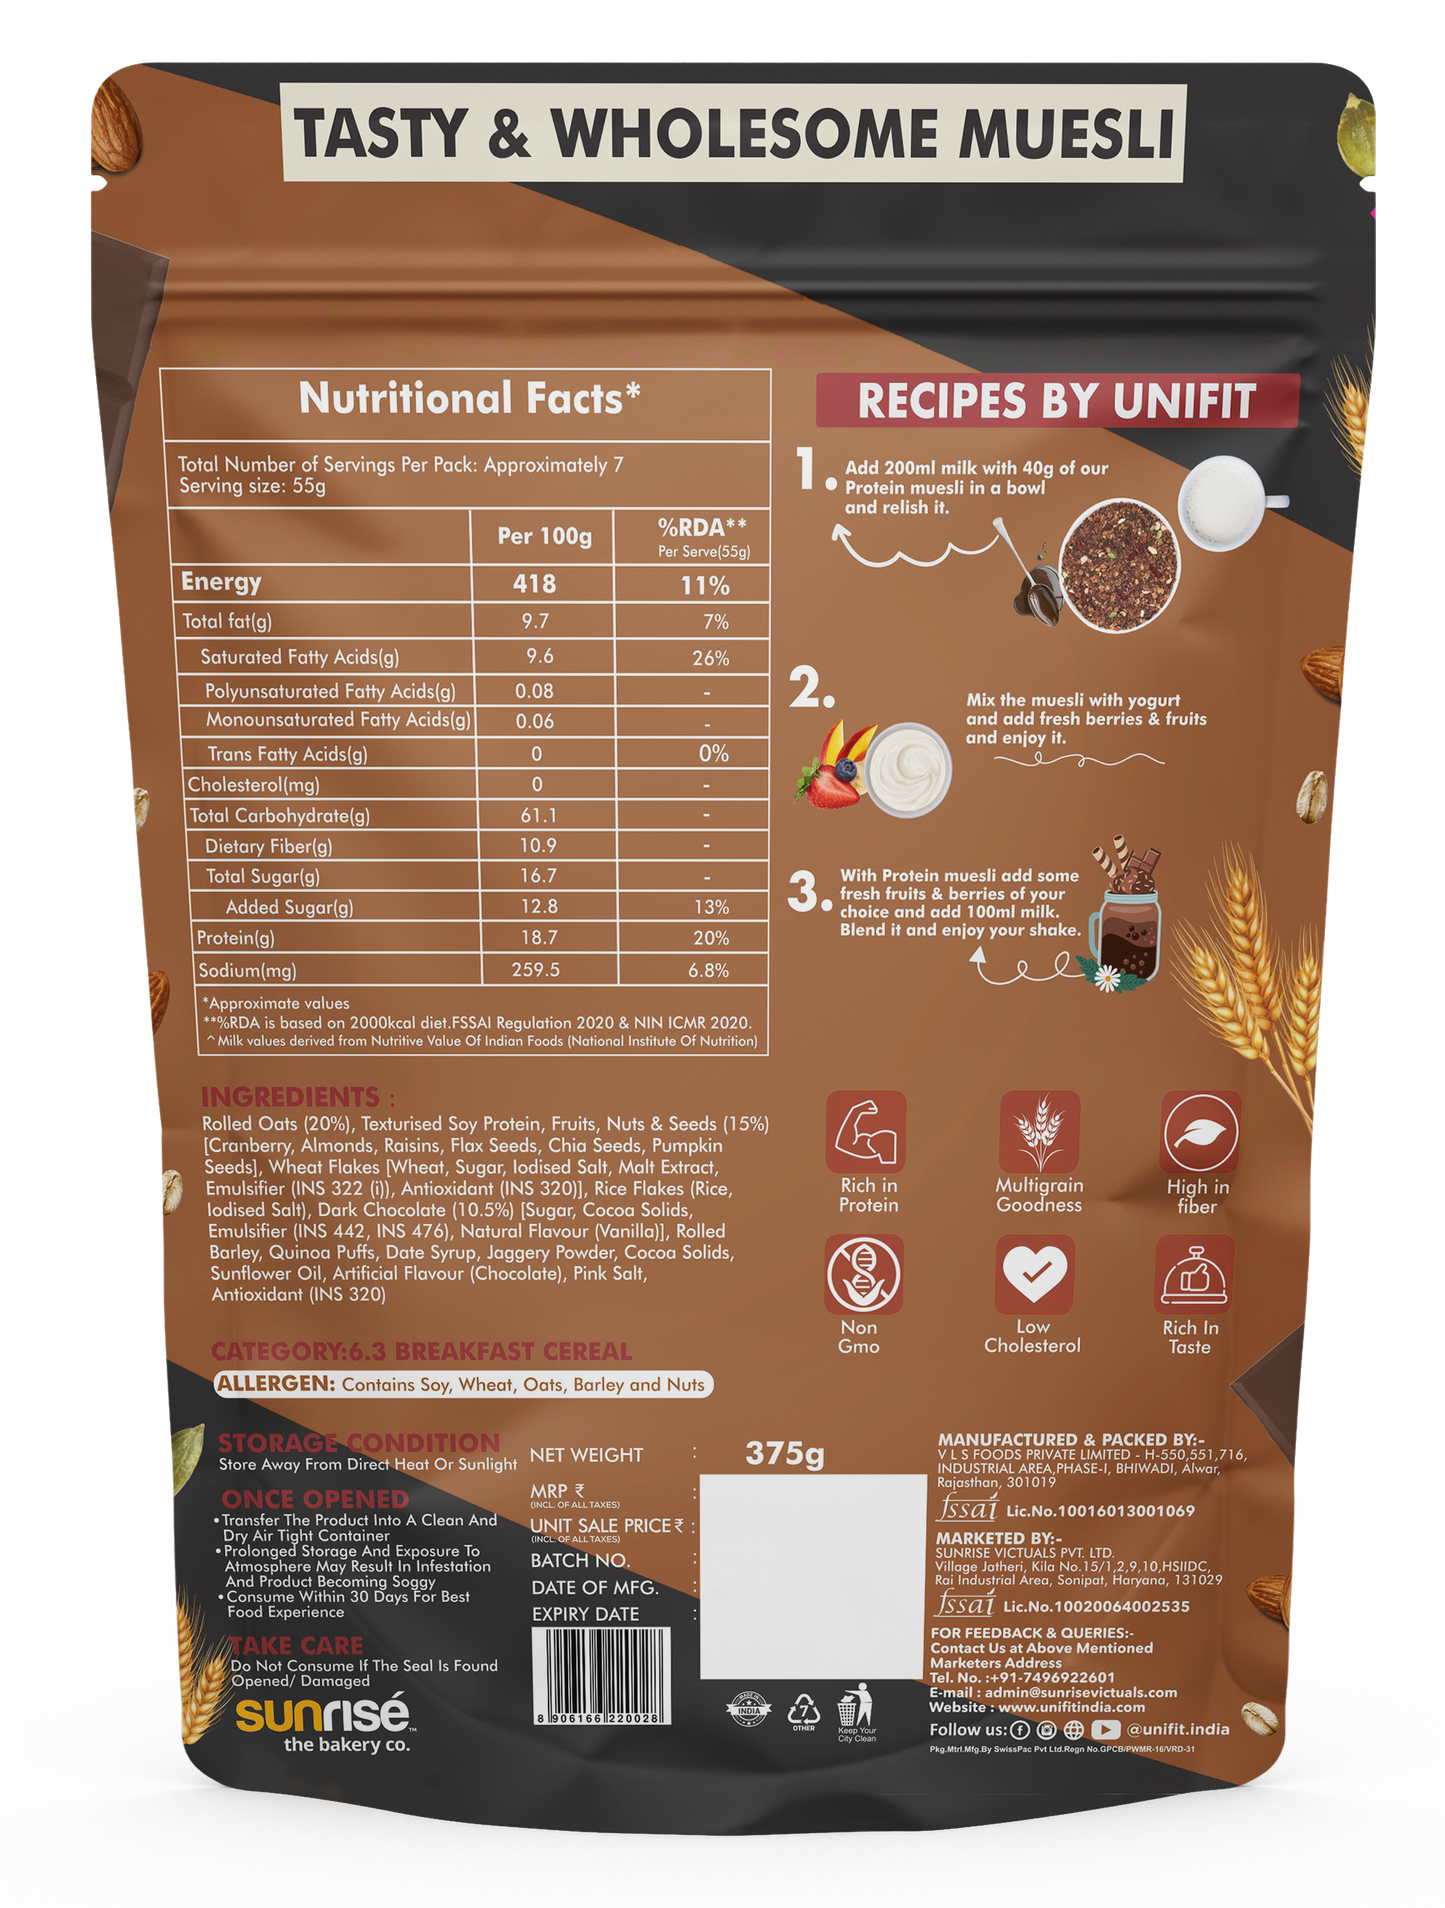 UNIFIT Protein Muesli with Chocolate and Cranberry